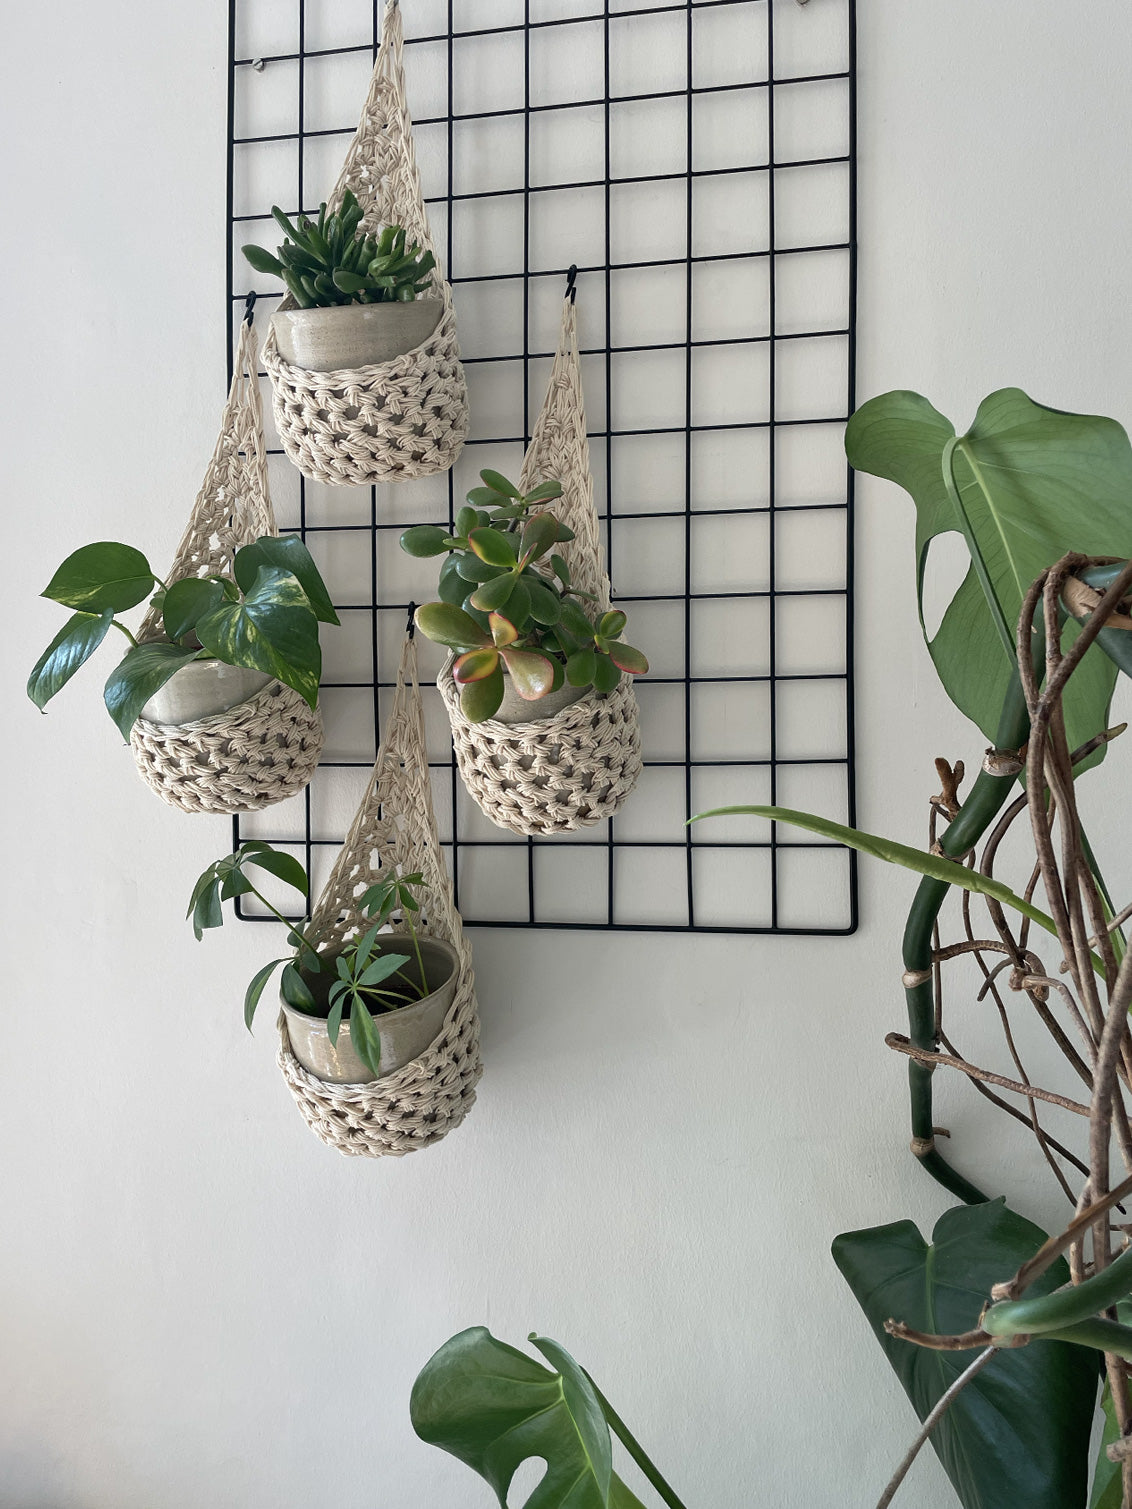 Image showing zoomed out view of a white wall with four cream wall mounted planters hanging together in a group, each one containing a pots and plant. Handmade cotton crochet plant baskets, used to display houseplants creatively in your home. 